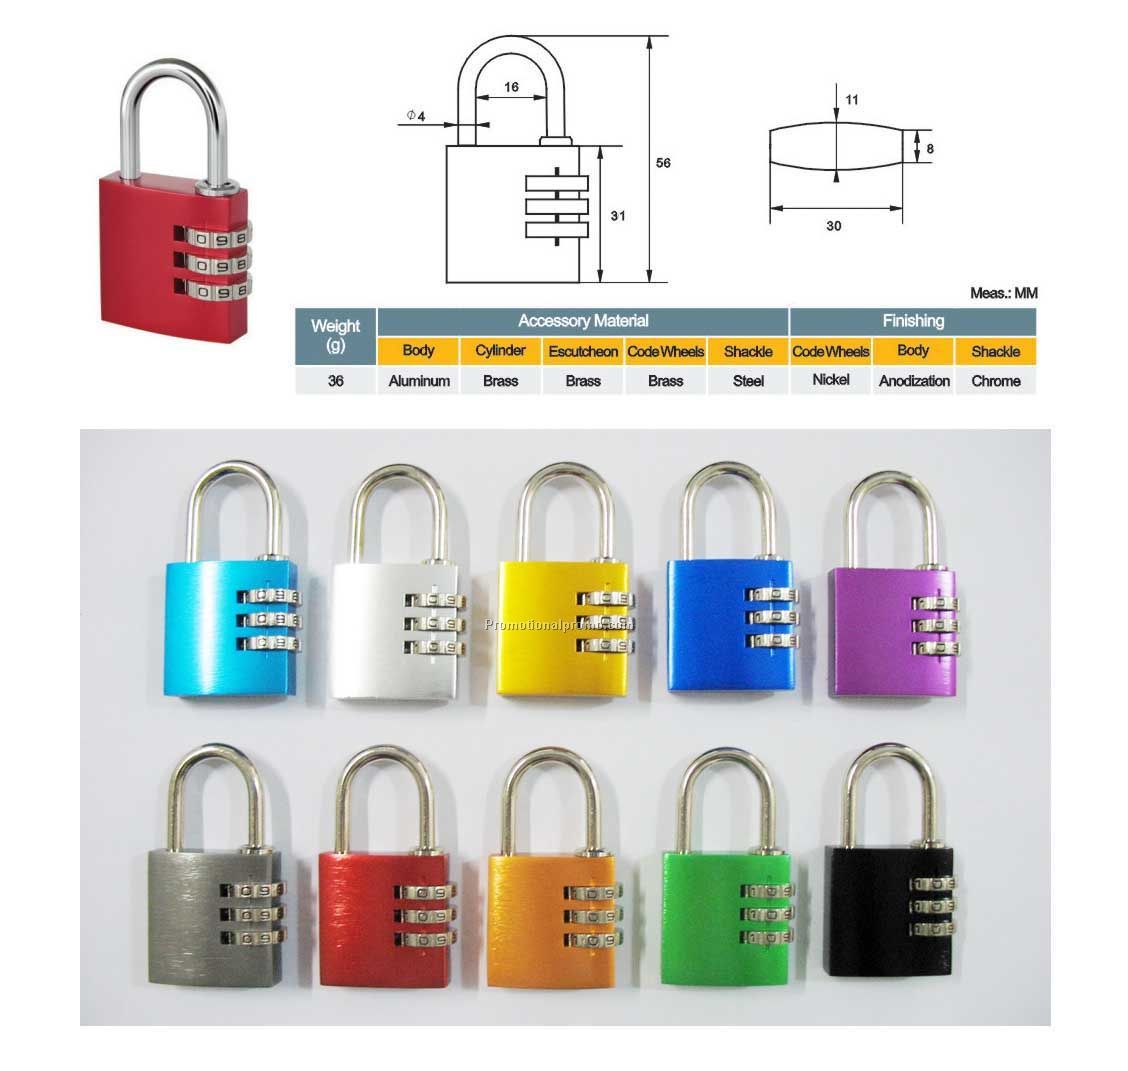 Combination lock with a 3-number combination